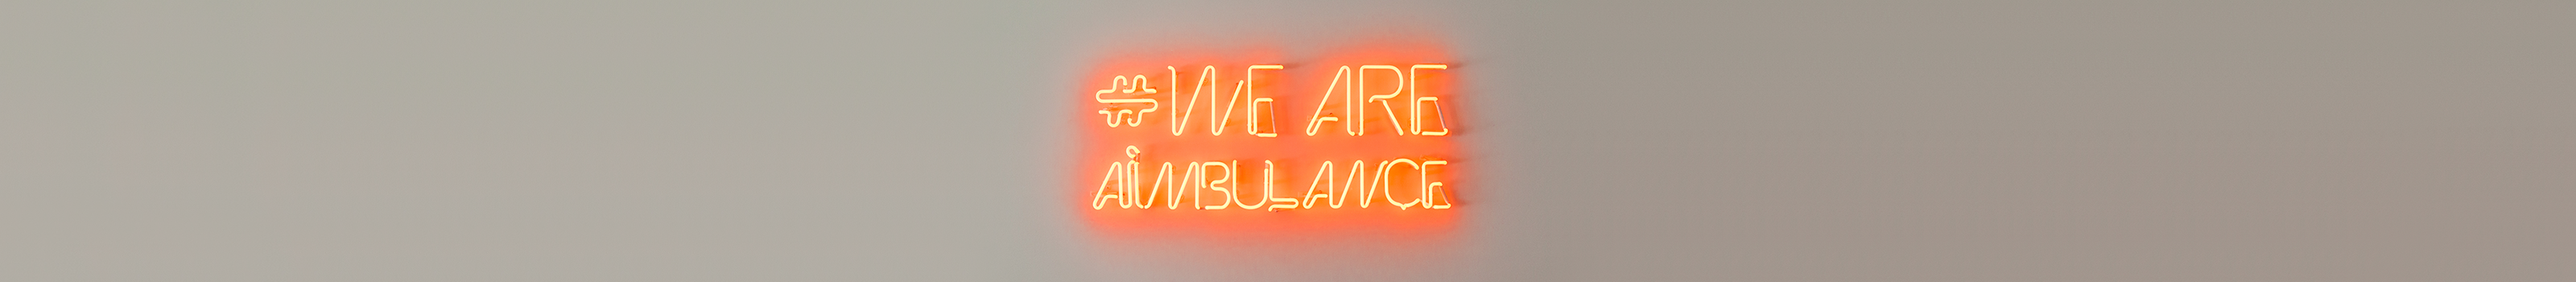 Aimbulance Agency's profile banner